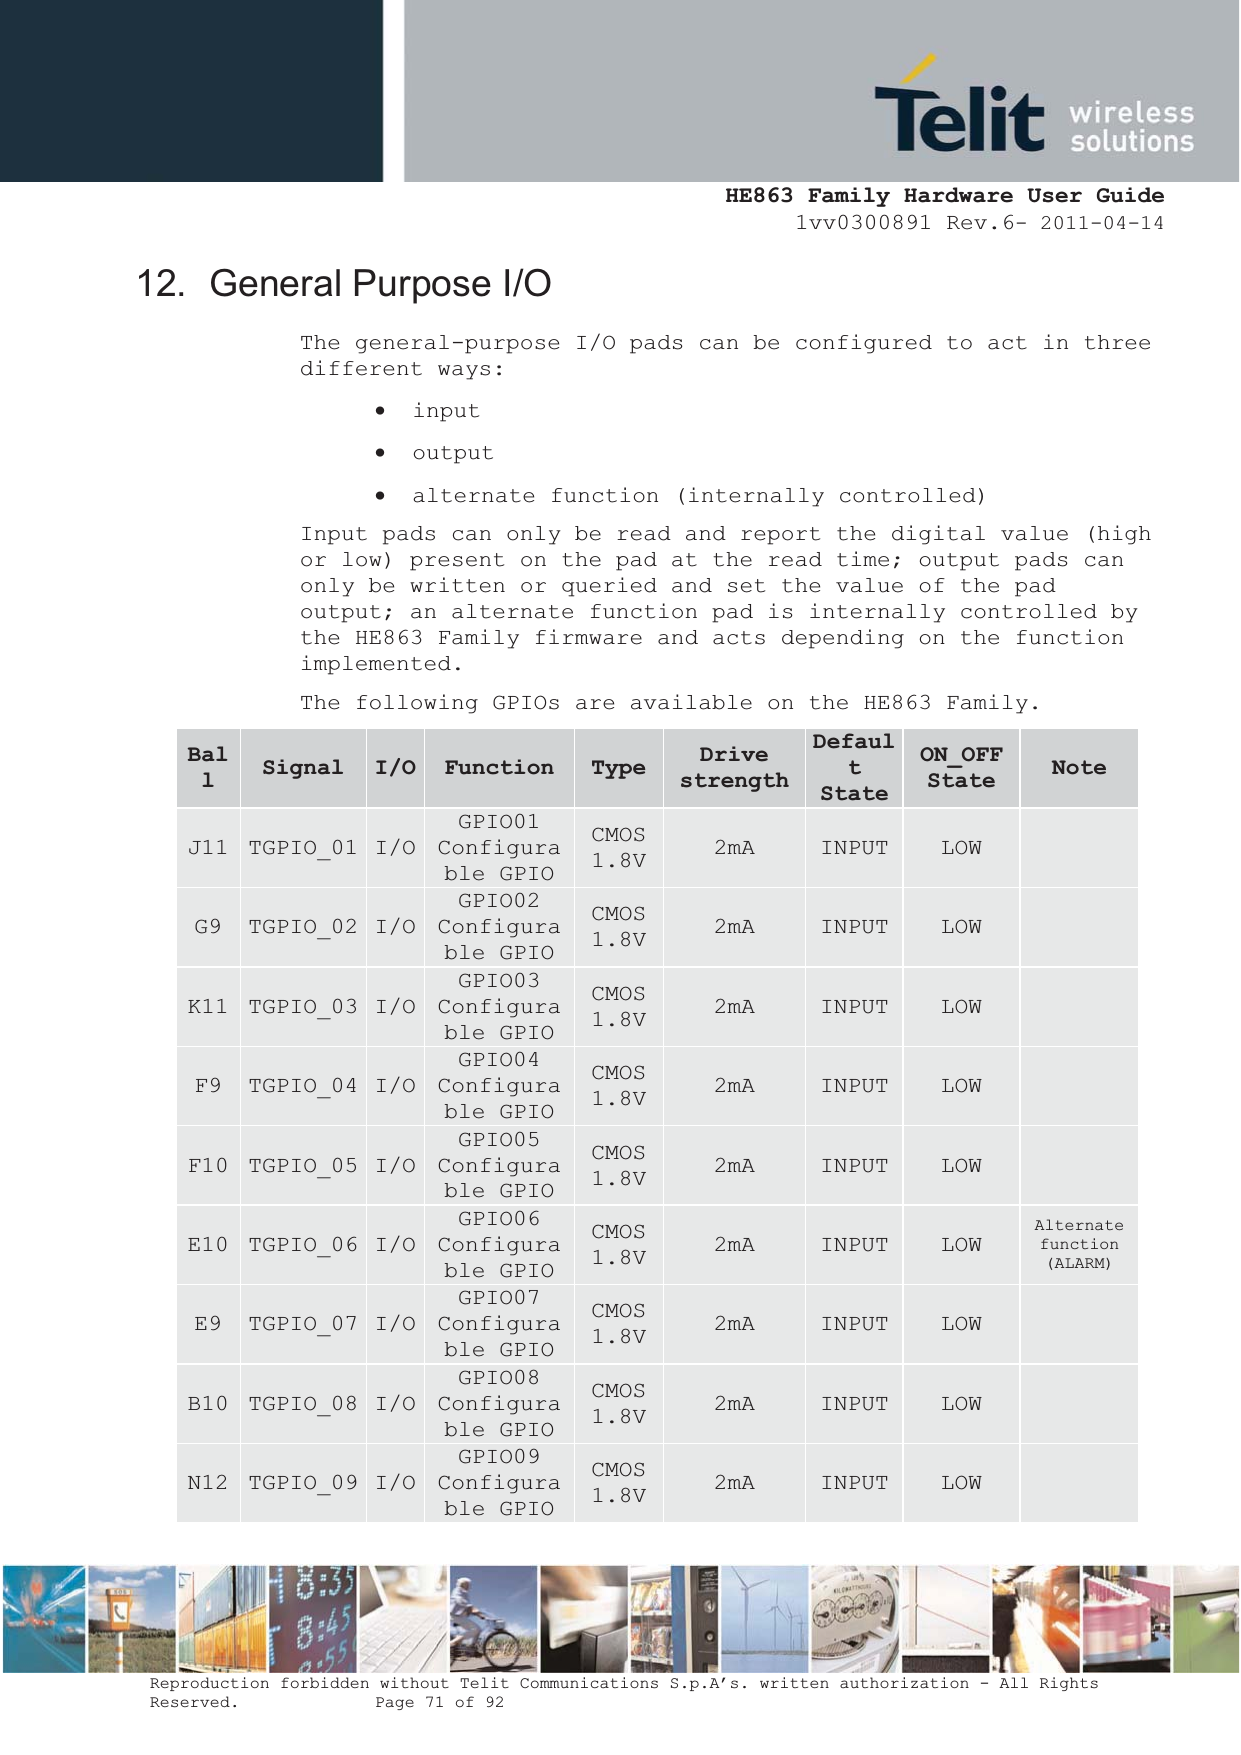  HE863 Family Hardware User Guide 1vv0300891 Rev.6- 2011-04-14    Reproduction forbidden without Telit Communications S.p.A’s. written authorization - All Rights Reserved.    Page 71 of 92  12.  General Purpose I/O The general-purpose I/O pads can be configured to act in three different ways: x input x output x alternate function (internally controlled) Input pads can only be read and report the digital value (high or low) present on the pad at the read time; output pads can only be written or queried and set the value of the pad output; an alternate function pad is internally controlled by the HE863 Family firmware and acts depending on the function implemented. The following GPIOs are available on the HE863 Family.  BallSignal I/O Function Type DrivestrengthDefaultStateON_OFFState NoteJ11  TGPIO_01  I/O GPIO01 Configurable GPIO CMOS 1.8V 2mA  INPUT  LOW   G9  TGPIO_02 I/O GPIO02 Configurable GPIO CMOS 1.8V 2mA  INPUT  LOW   K11  TGPIO_03  I/O GPIO03 Configurable GPIO CMOS 1.8V 2mA  INPUT  LOW   F9  TGPIO_04 I/O GPIO04 Configurable GPIO CMOS 1.8V 2mA  INPUT  LOW   F10  TGPIO_05  I/O GPIO05 Configurable GPIO CMOS 1.8V 2mA  INPUT  LOW   E10  TGPIO_06  I/O GPIO06 Configurable GPIO CMOS 1.8V 2mA  INPUT  LOW Alternate function (ALARM) E9  TGPIO_07 I/O GPIO07 Configurable GPIO CMOS 1.8V 2mA  INPUT  LOW   B10  TGPIO_08  I/O GPIO08 Configurable GPIO CMOS 1.8V 2mA  INPUT  LOW   N12  TGPIO_09  I/O GPIO09 Configurable GPIO CMOS 1.8V 2mA  INPUT  LOW   